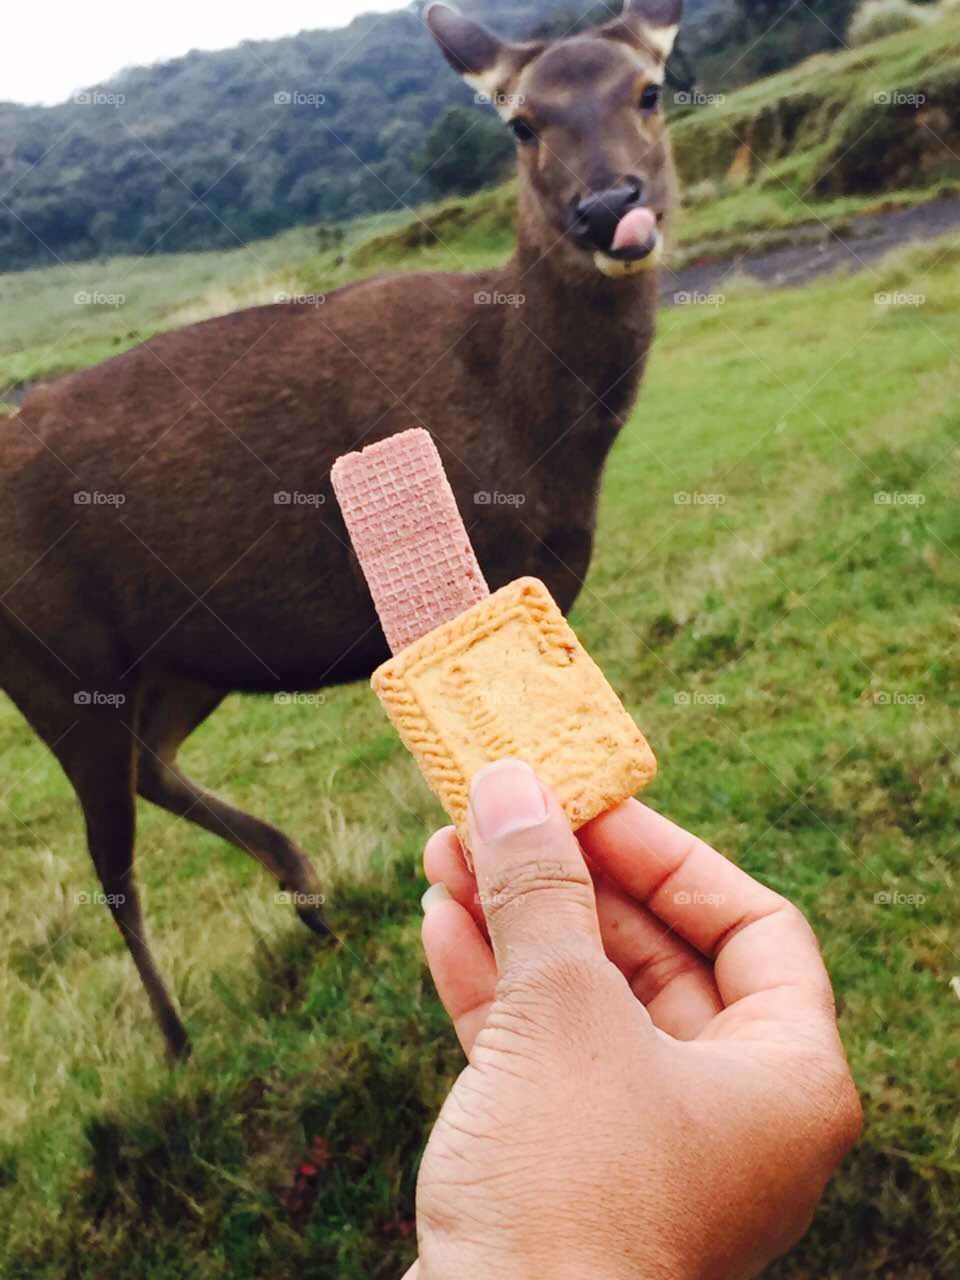 try to give biscuits to a animal